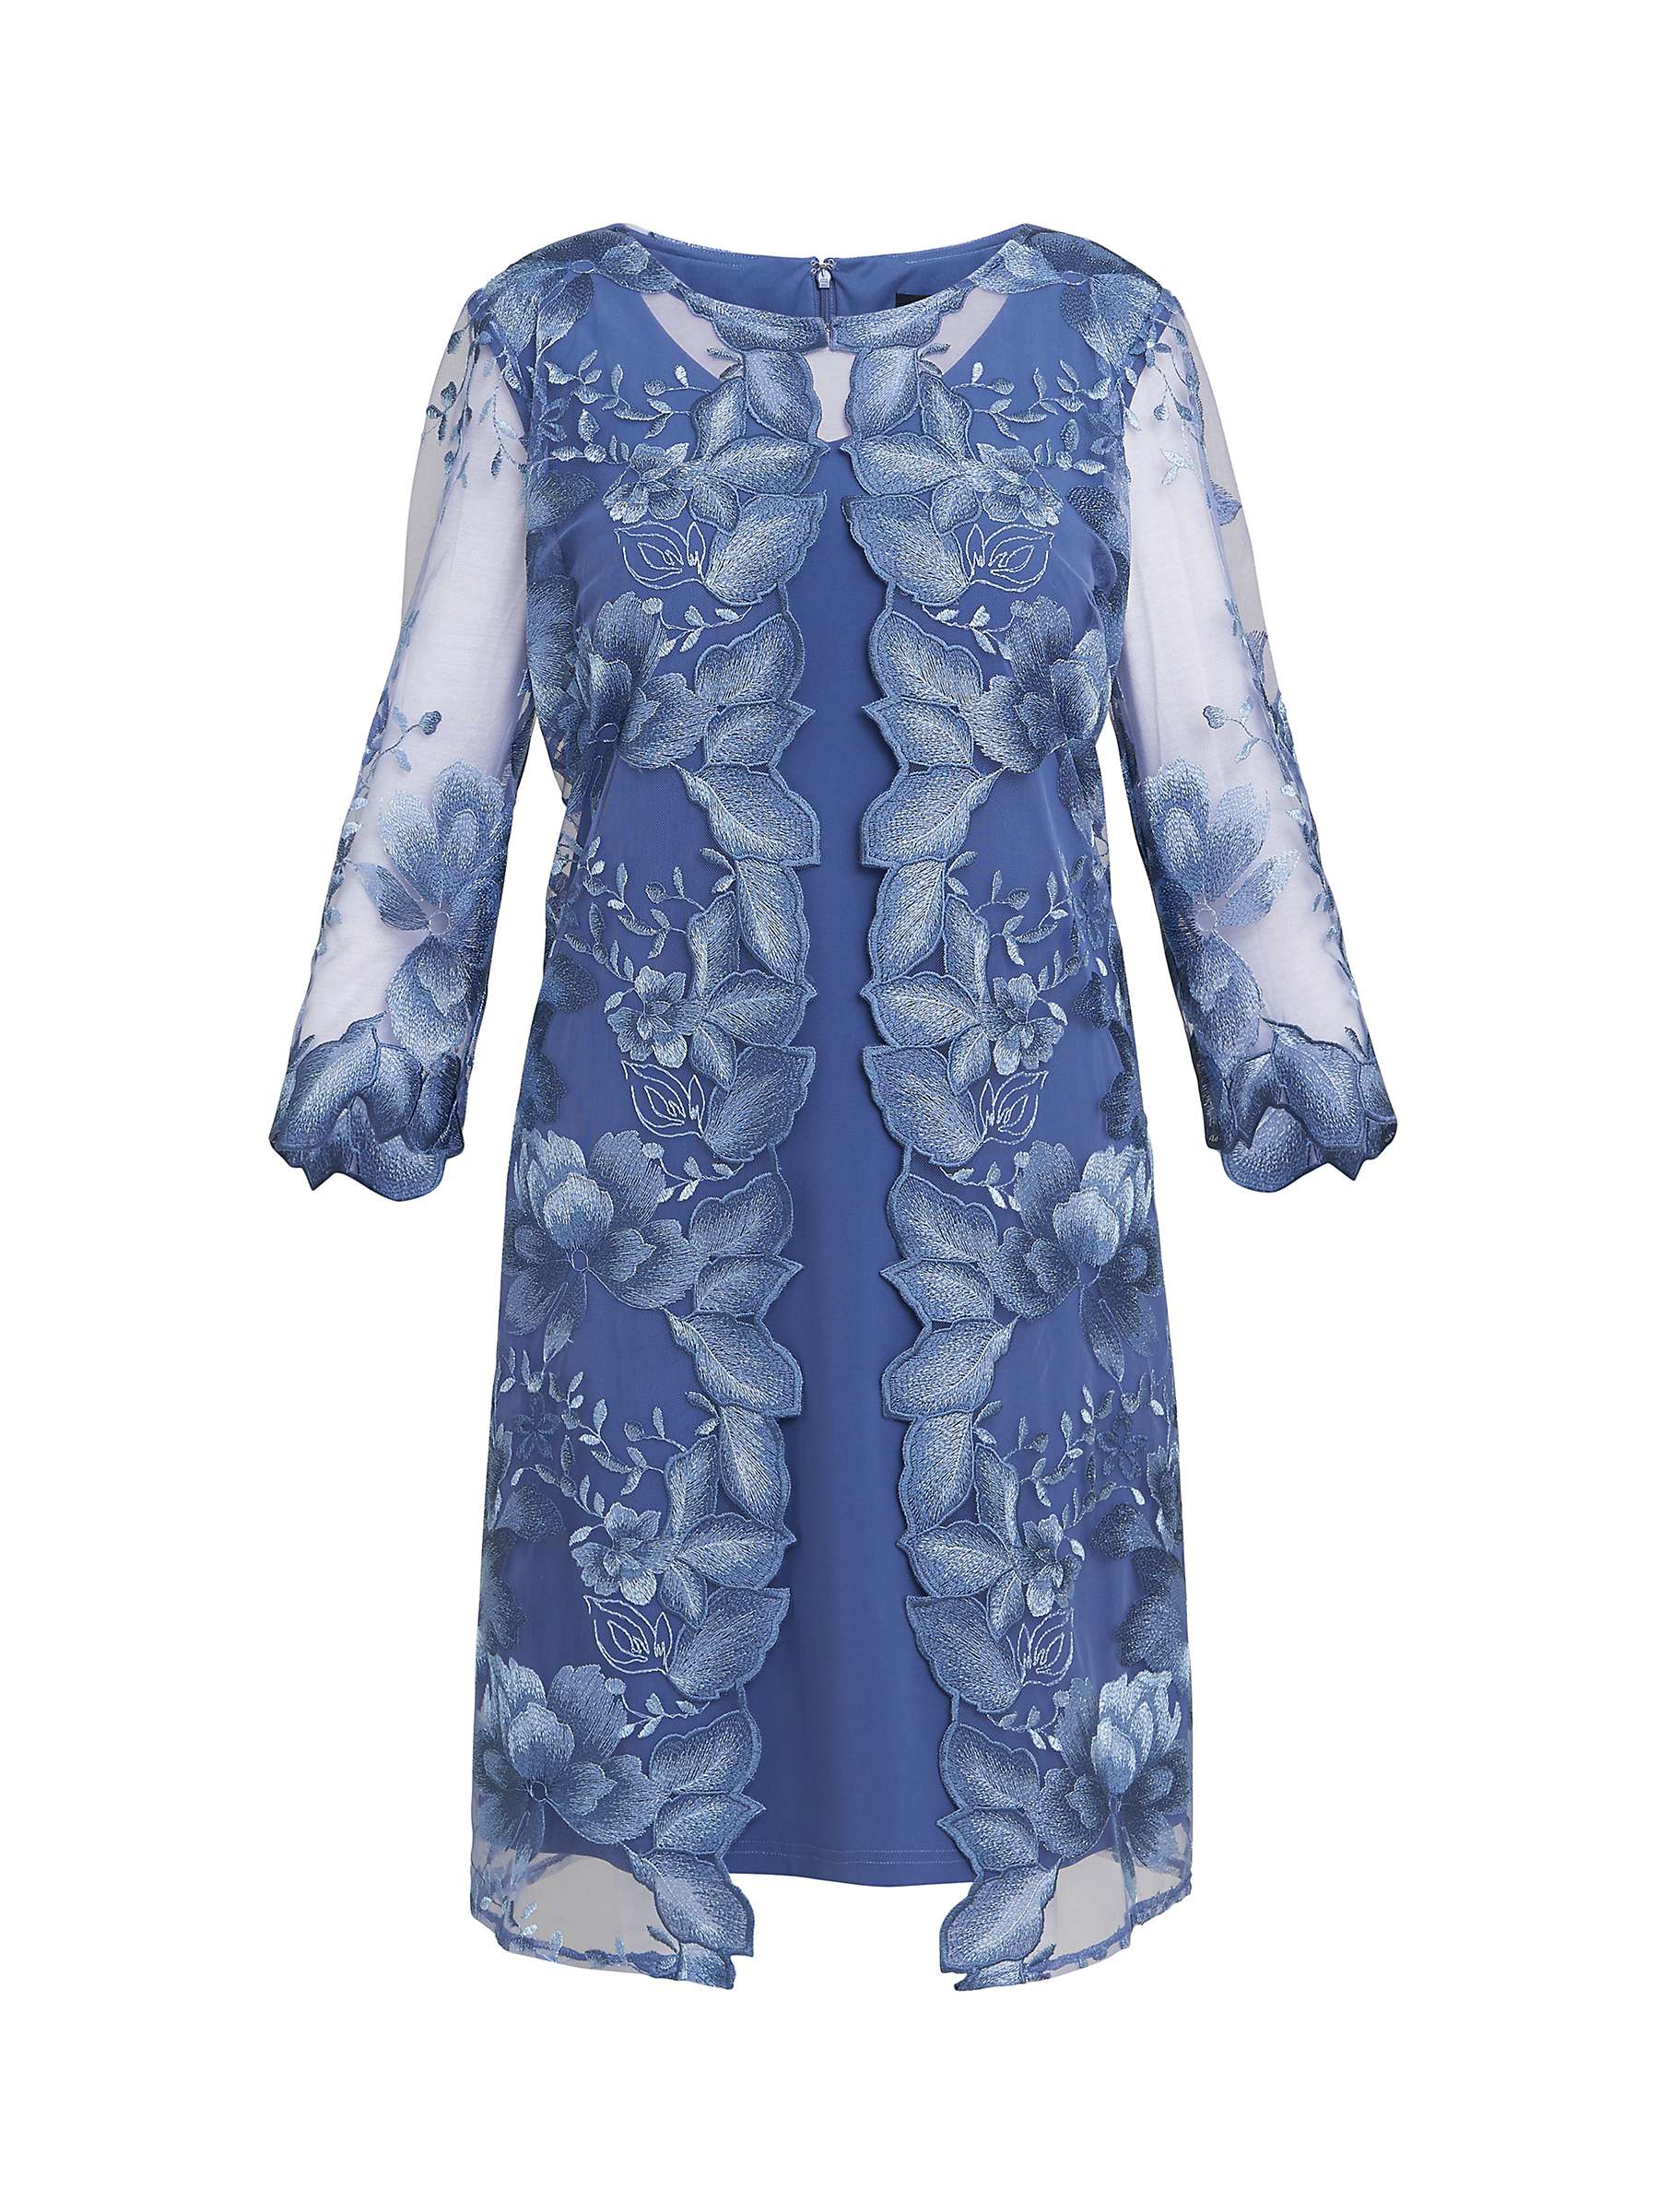 Buy Gina Bacconi Savoy Embroidered Lace Mock Jacket With Jersey Dress, Blue Online at johnlewis.com